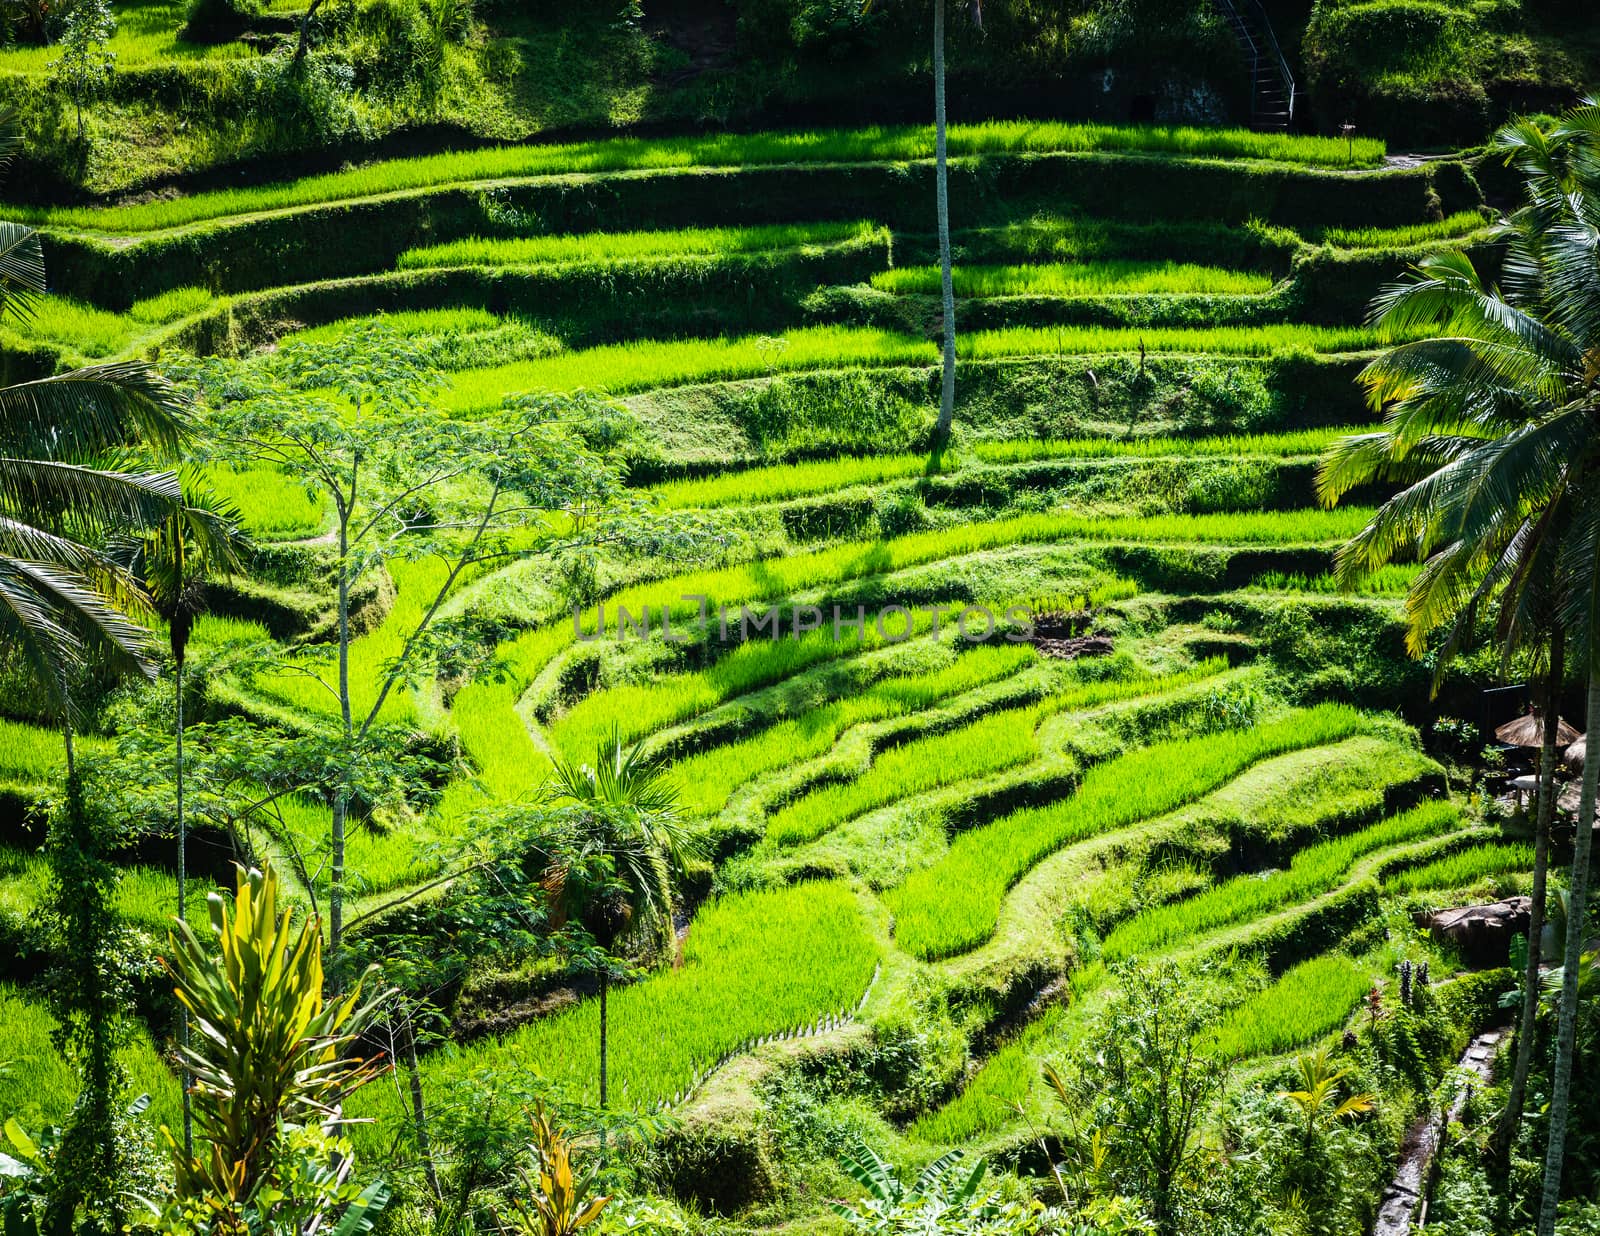 Tegalalang rice terraces in Bali, Indonesia by dutourdumonde